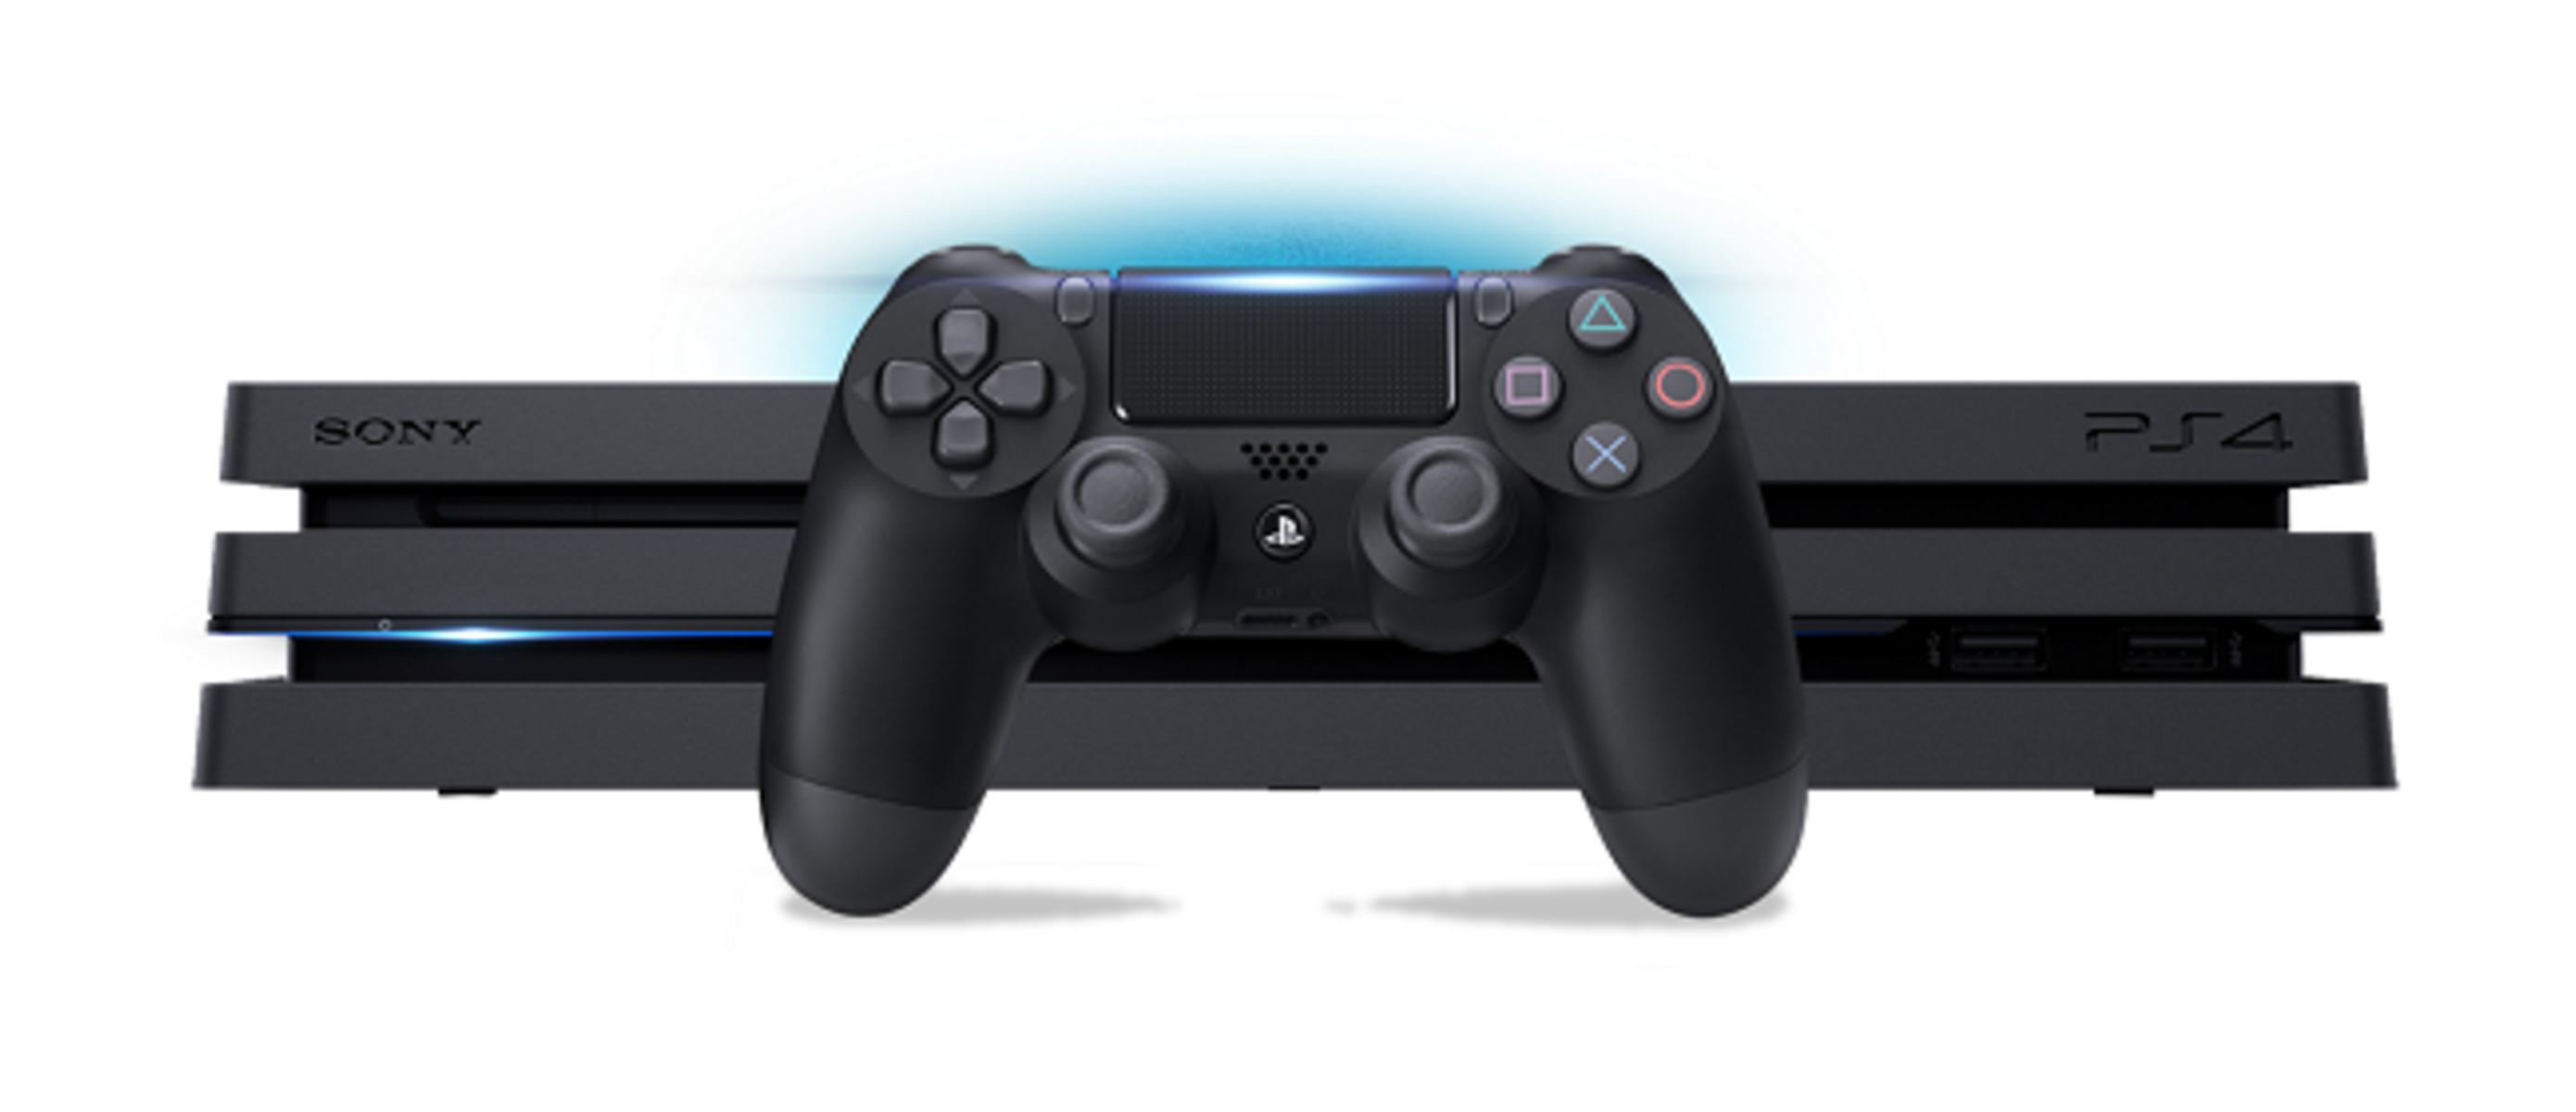 Картинка ps4. Console PLAYSTATION ps4. Ps4 Pro 500gb. PLAYSTATION 4 Pro 1tb. Приставка Sony PLAYSTATION 5 PNG.